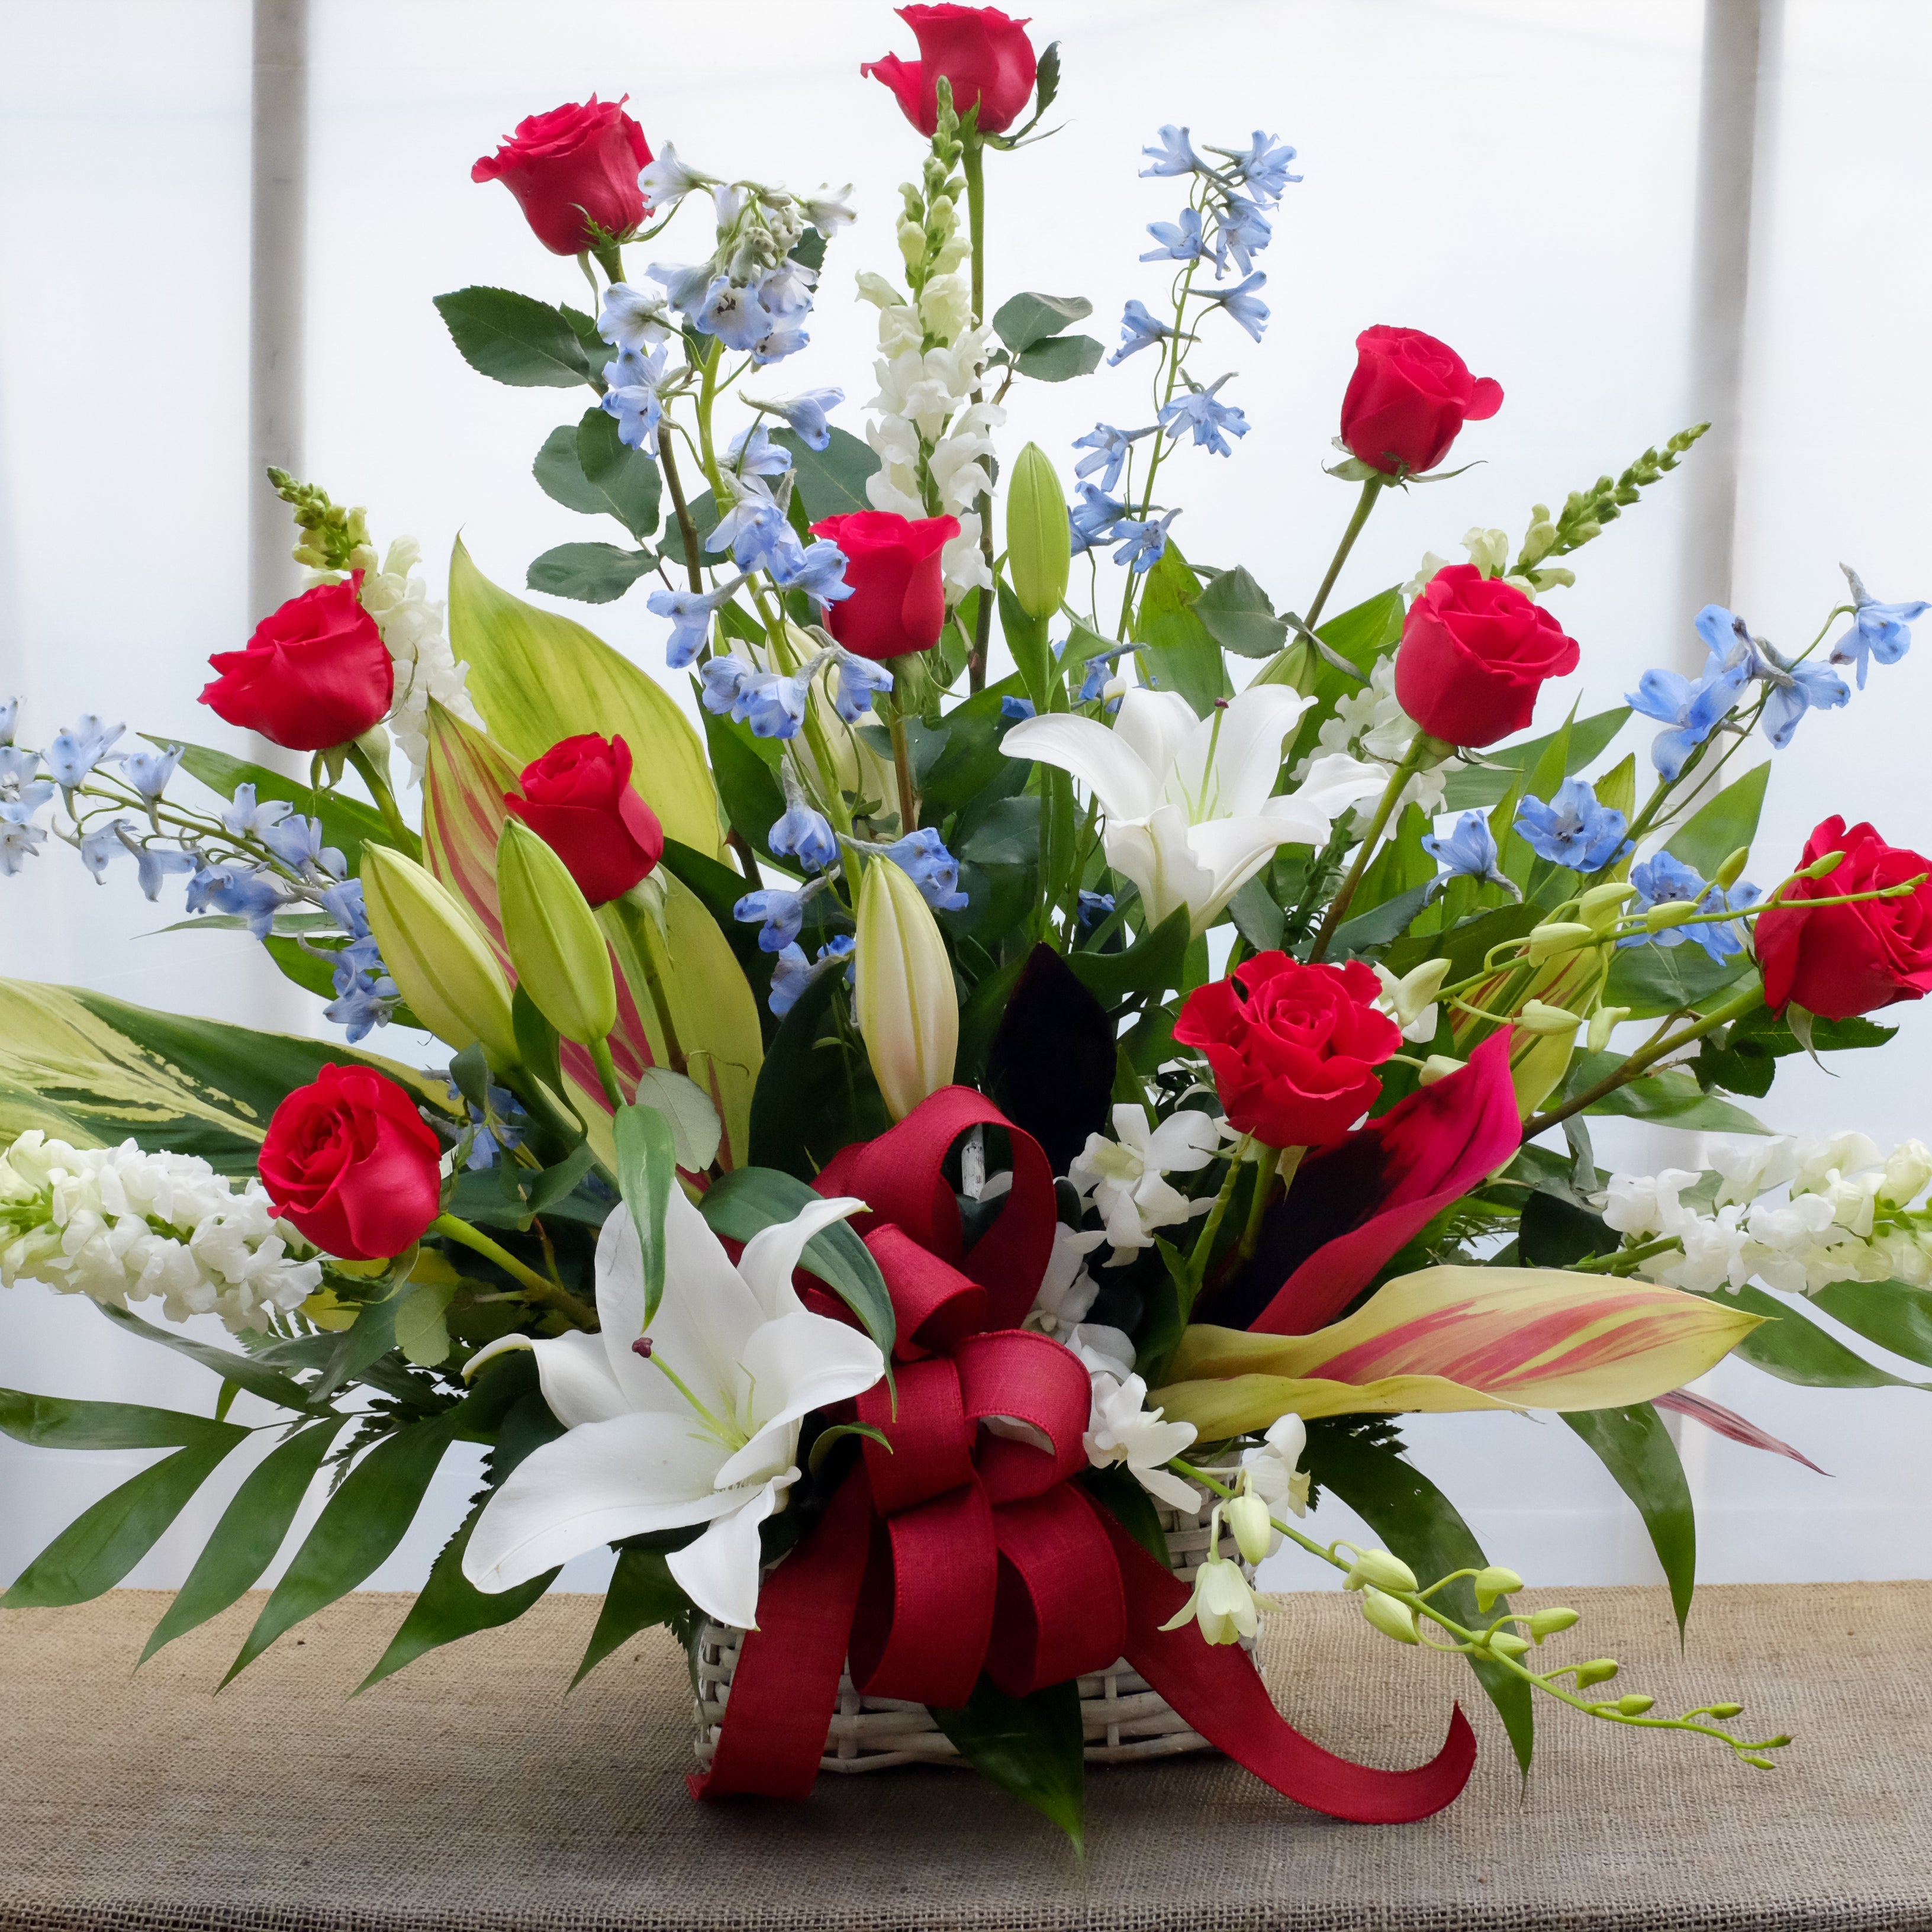 Denmark Funeral Basket: Red Roses, White Lilies, Delphinium and Snap Dragons. Designed by Michler's Florist in Lexington, KY